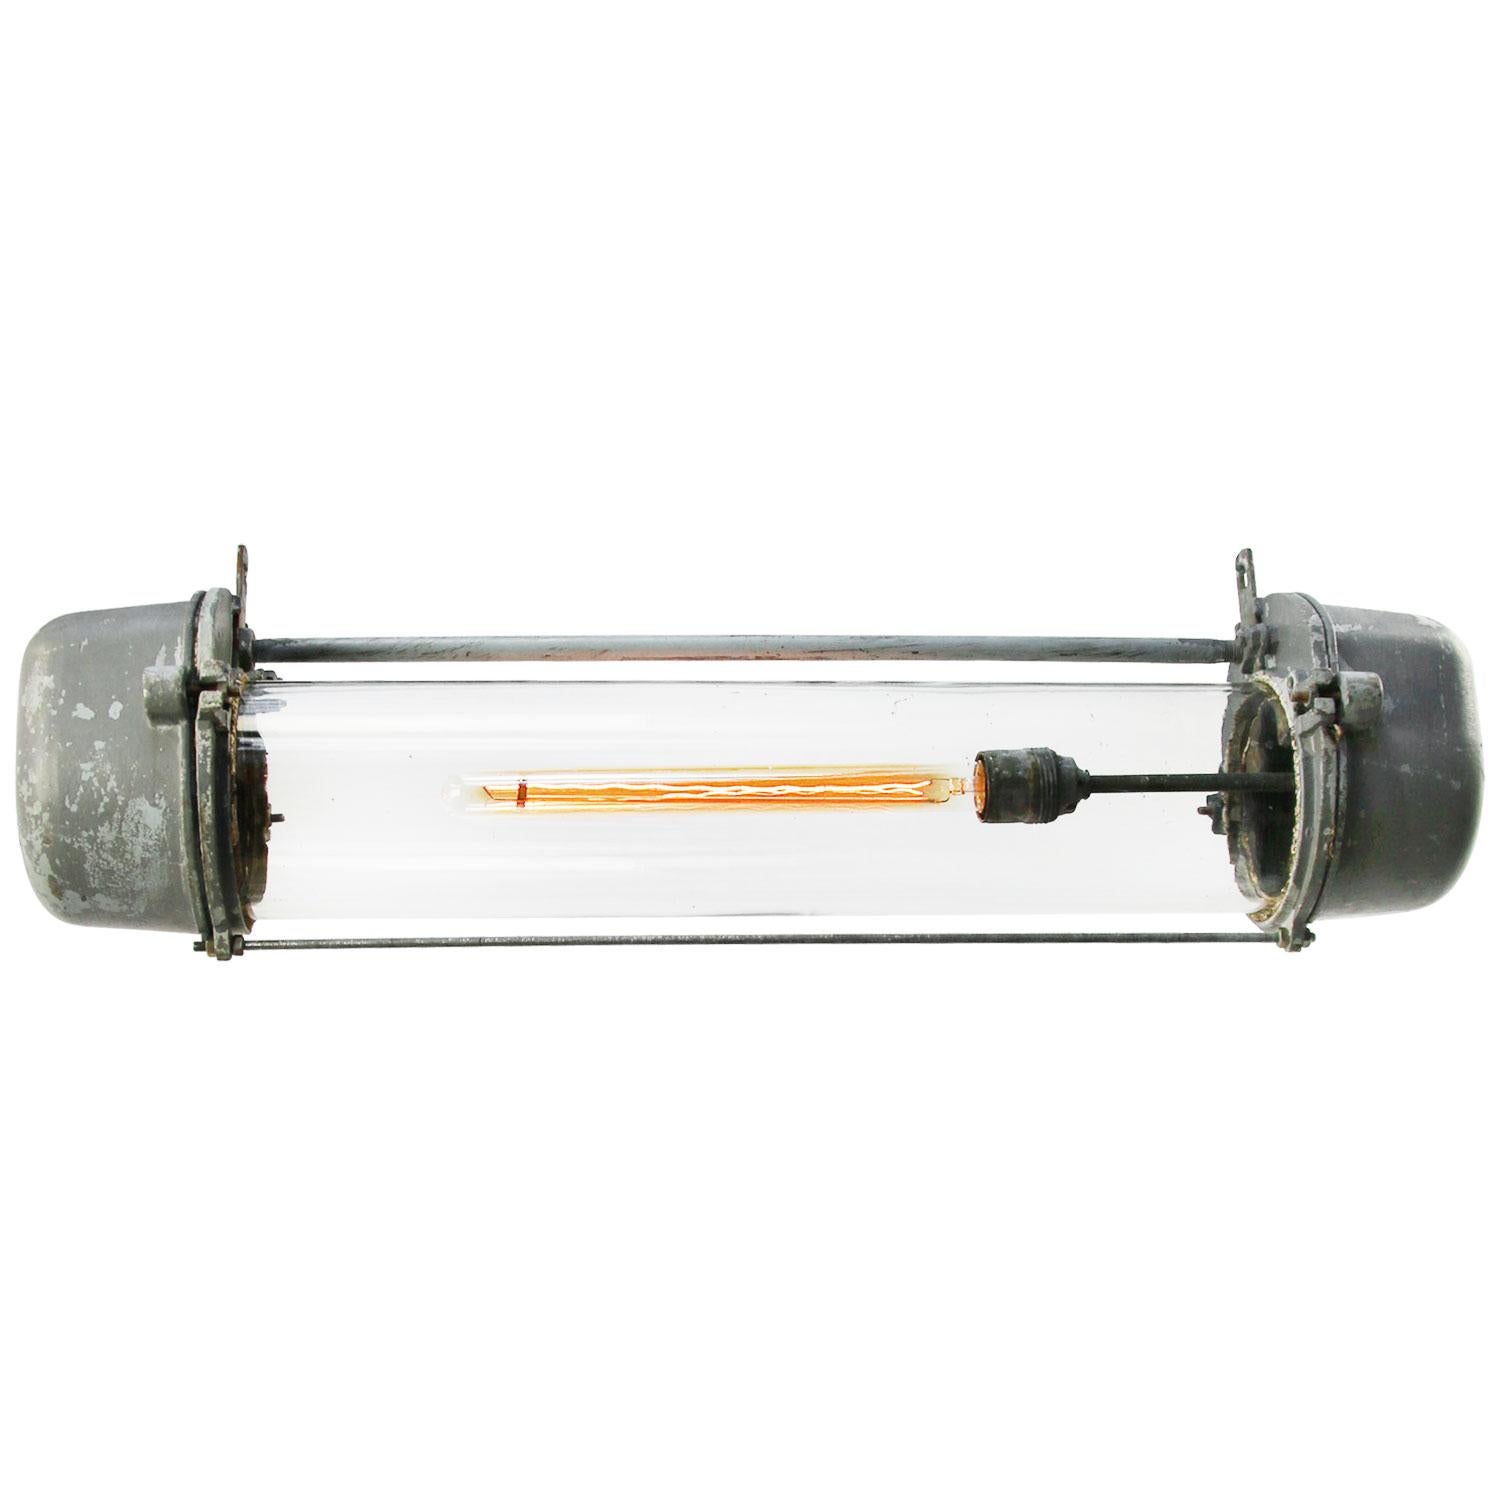 Industrial cast aluminium light.
Clear glass.

Weight 3.00 kg / 6.6 lb

Priced per individual item. All lamps have been made suitable by international standards for incandescent light bulbs, energy-efficient and LED bulbs. E26/E27 bulb holders